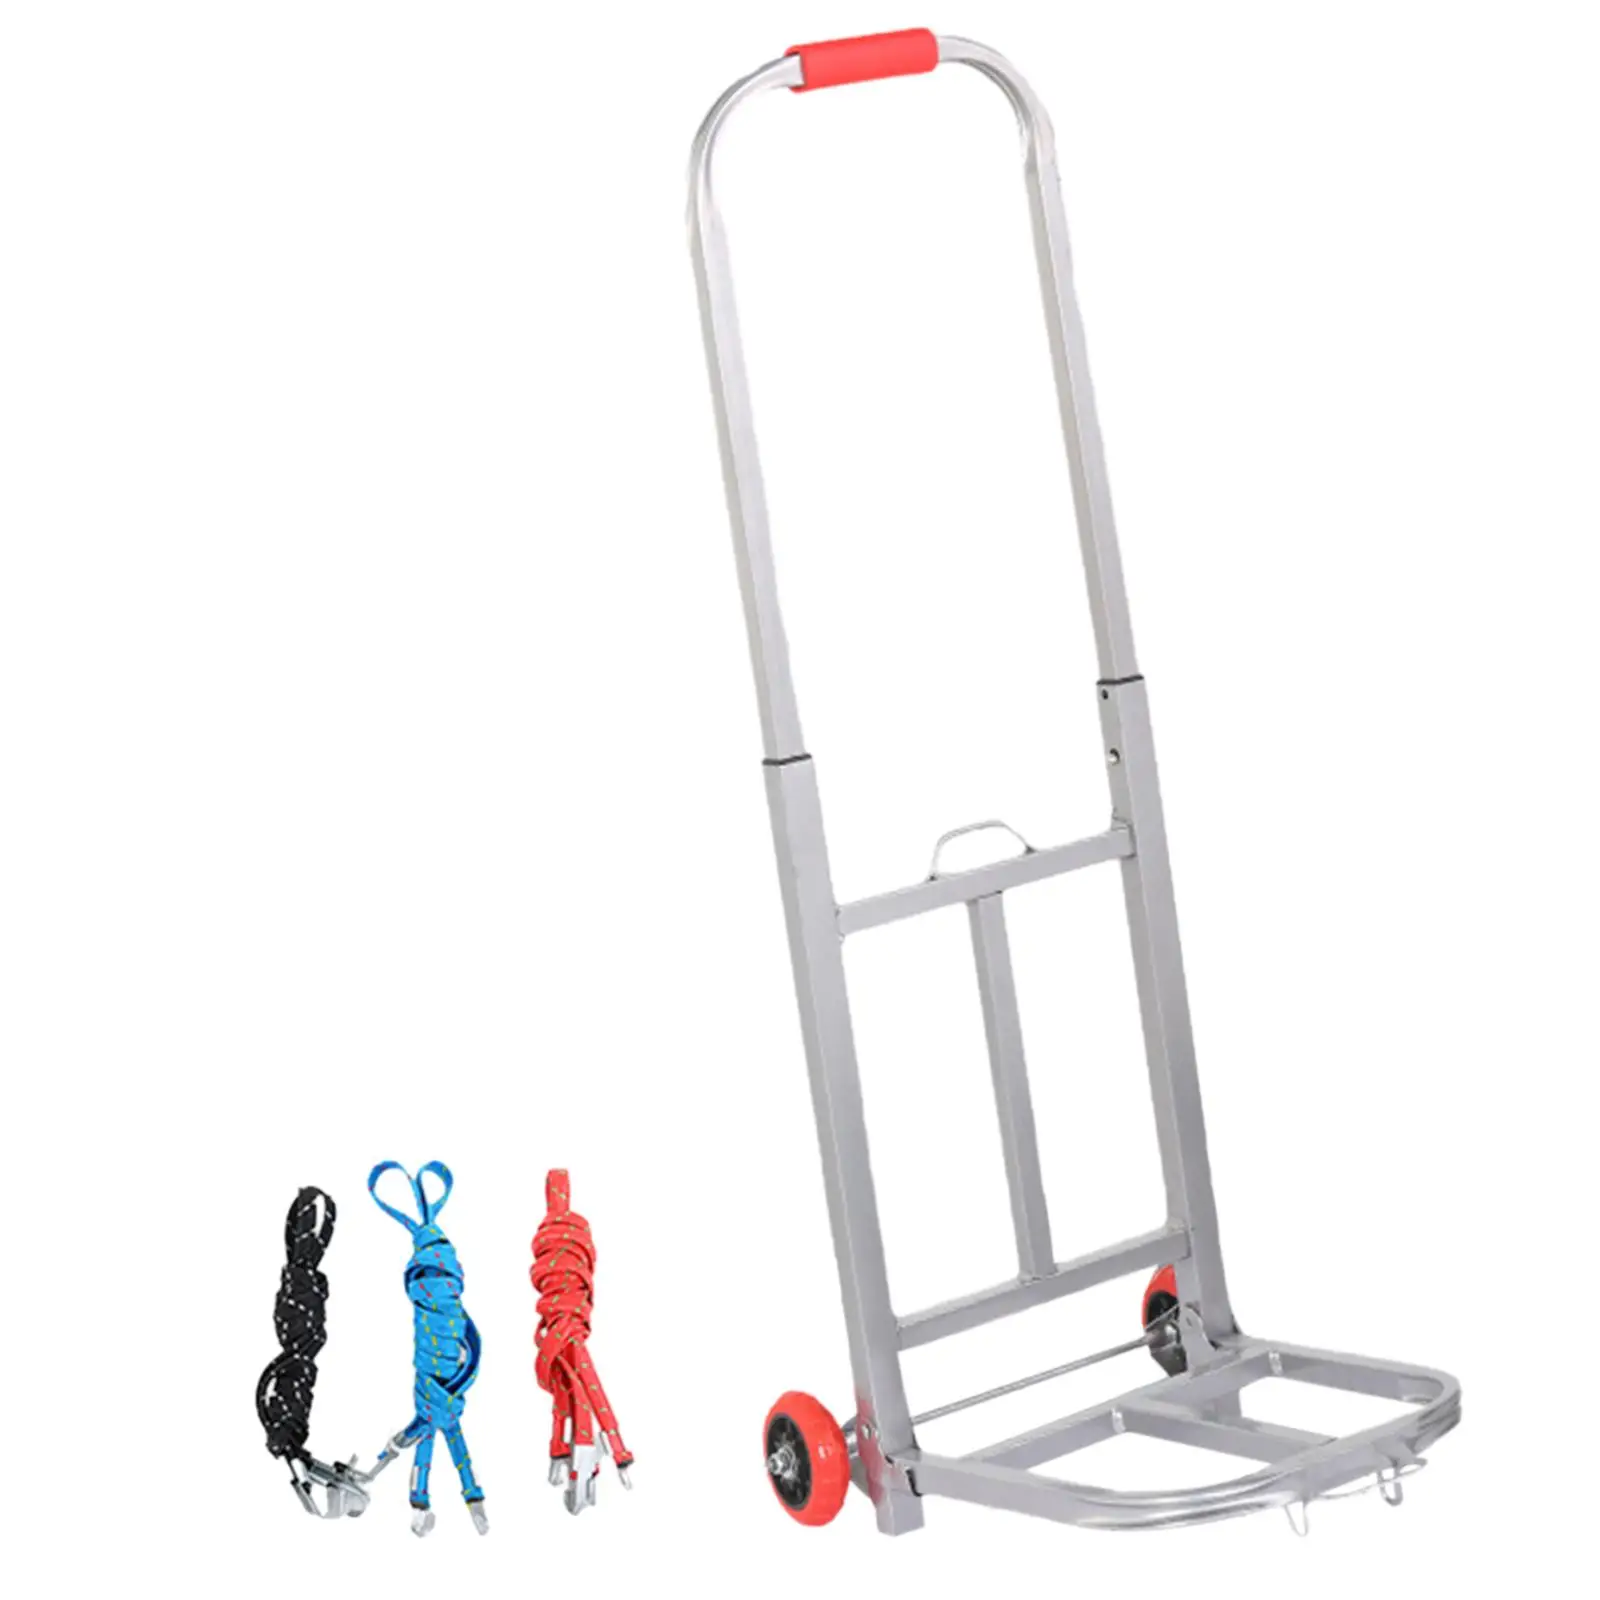 Foldable Folding Hand Truck Luggage Handcart Adjustable Handle for Couriers